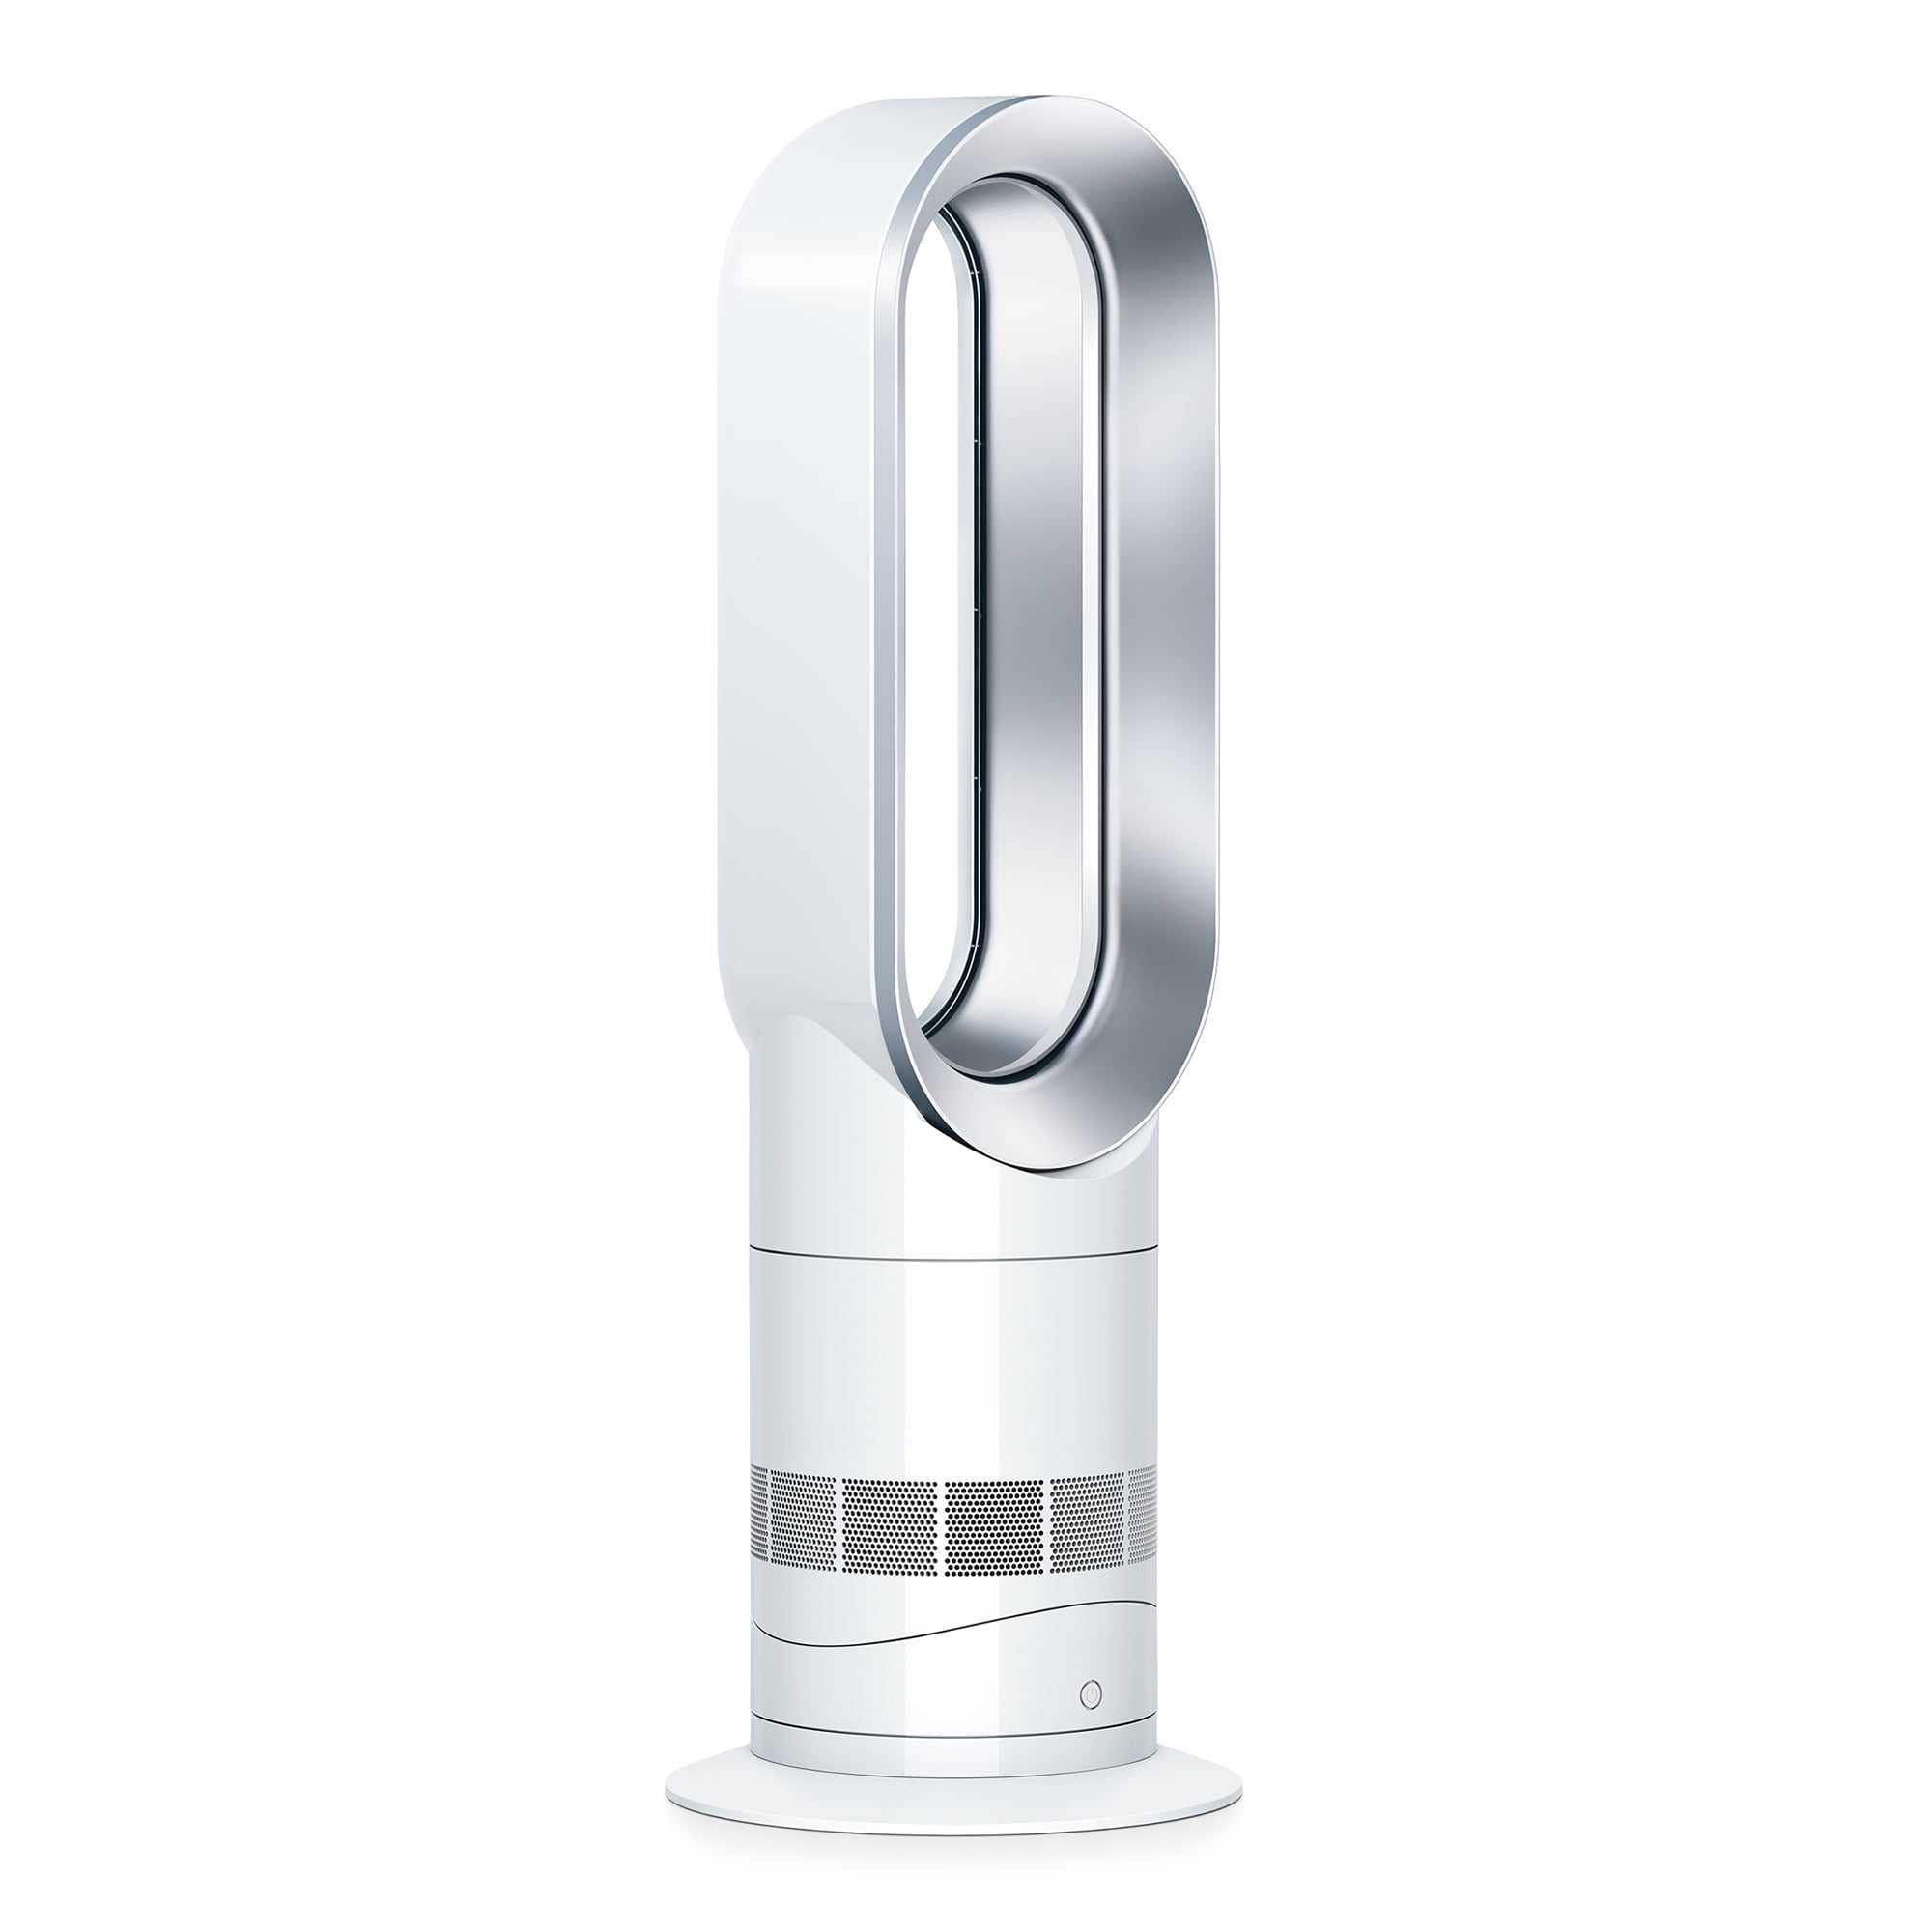 Stay Cozy this Winter: Discover the Best Dyson Fan Heaters for Your Home - Specifications and features of the Dyson Hot + Cool Jet Focus AM09 Fan Heater